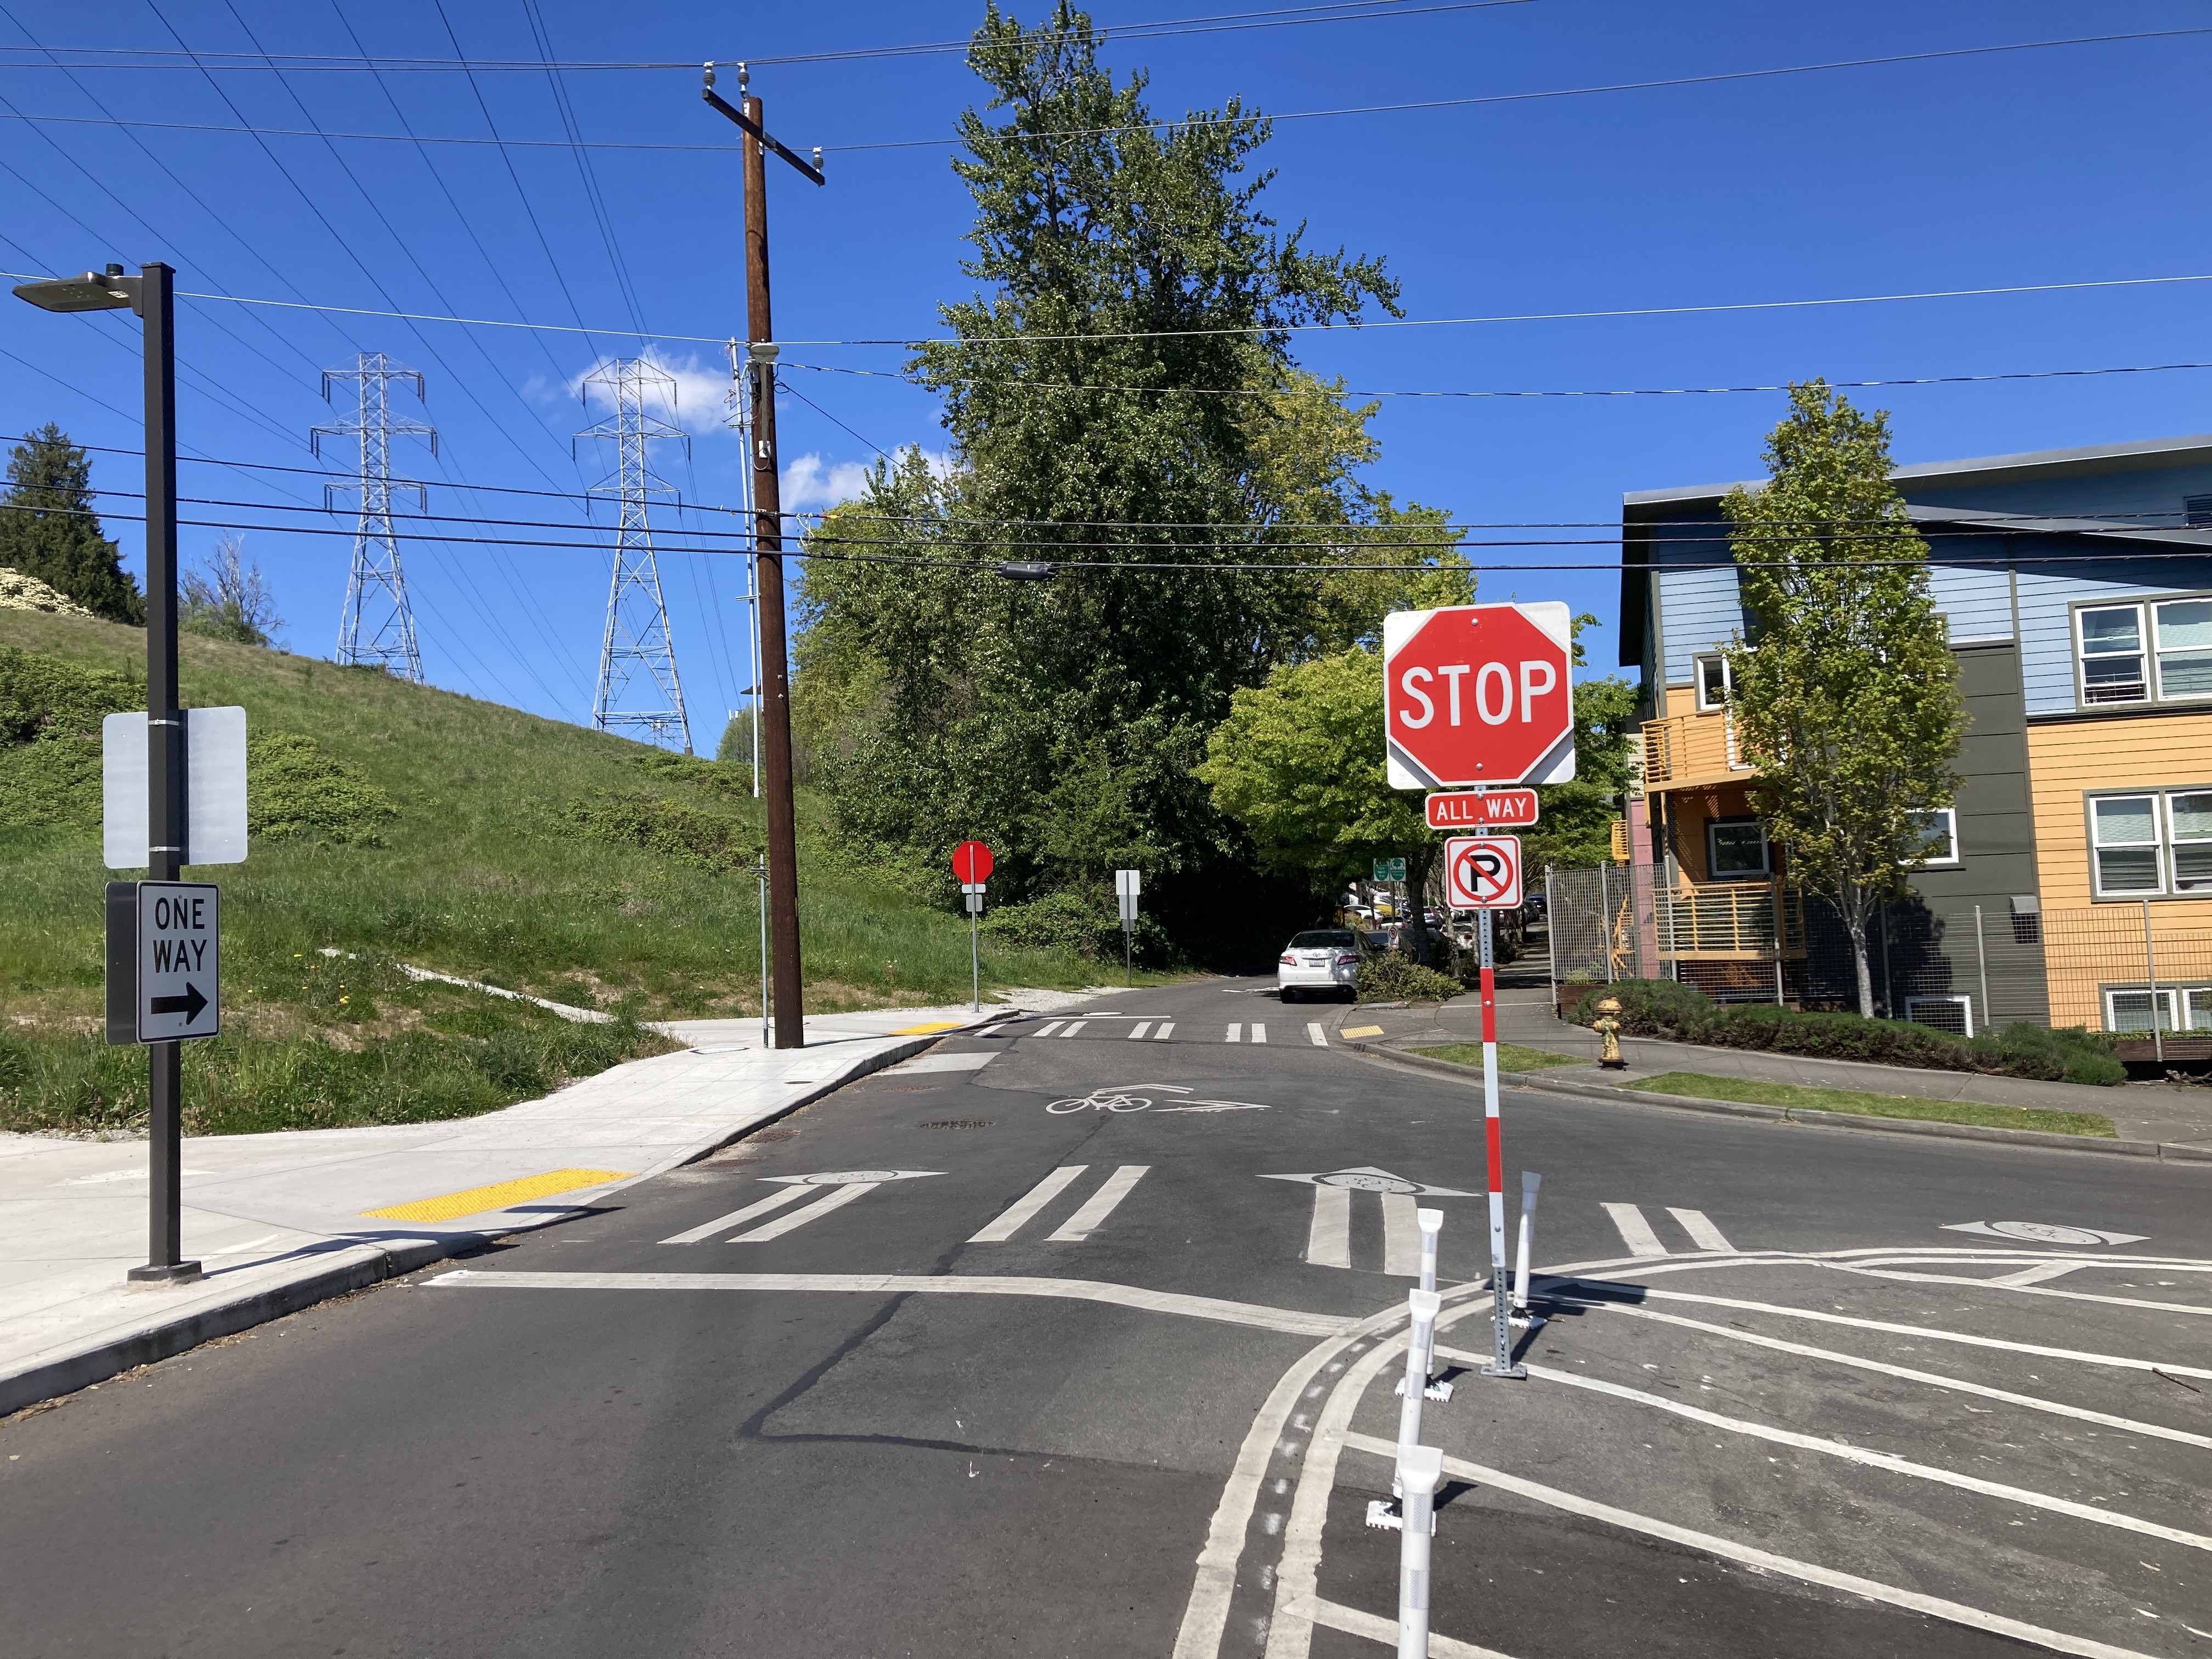 New stop sign and stop bar installed on a corner